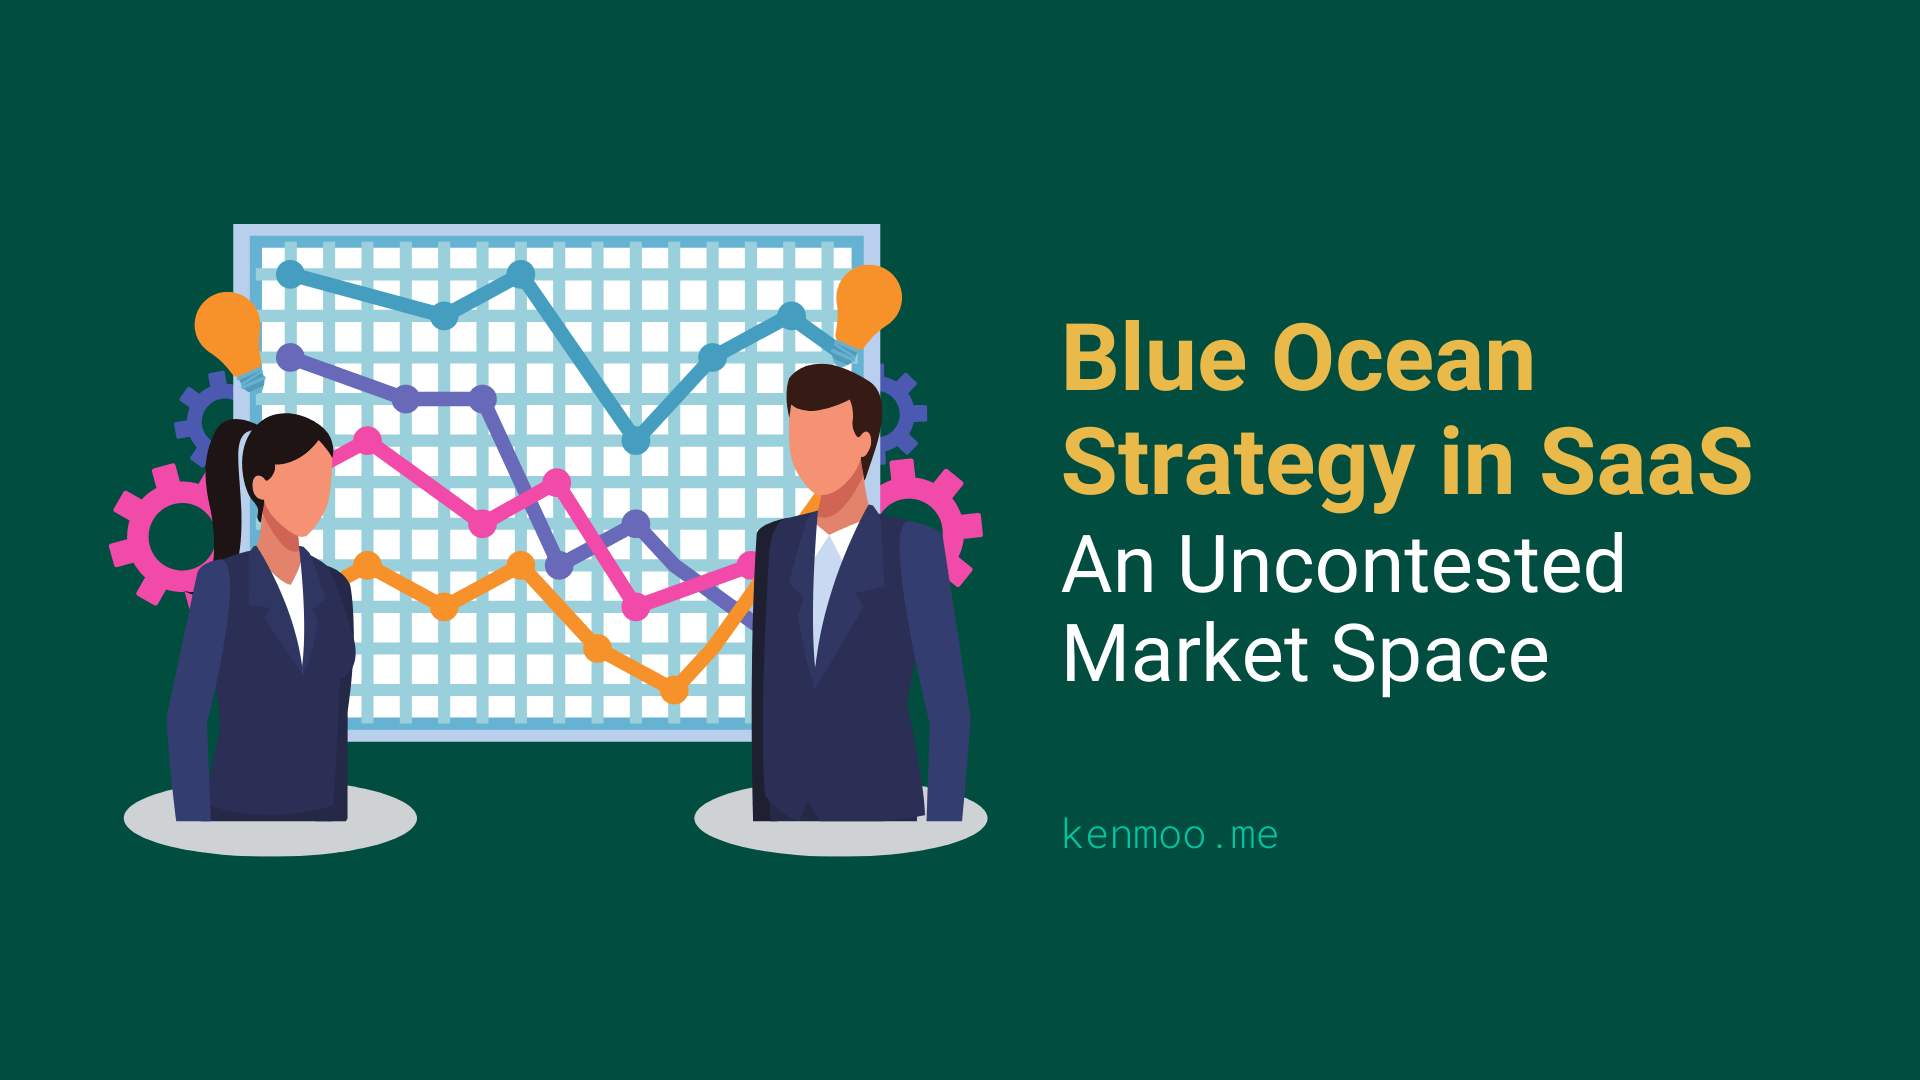 Blue Ocean Strategy in SaaS: New Pain Points, New Market